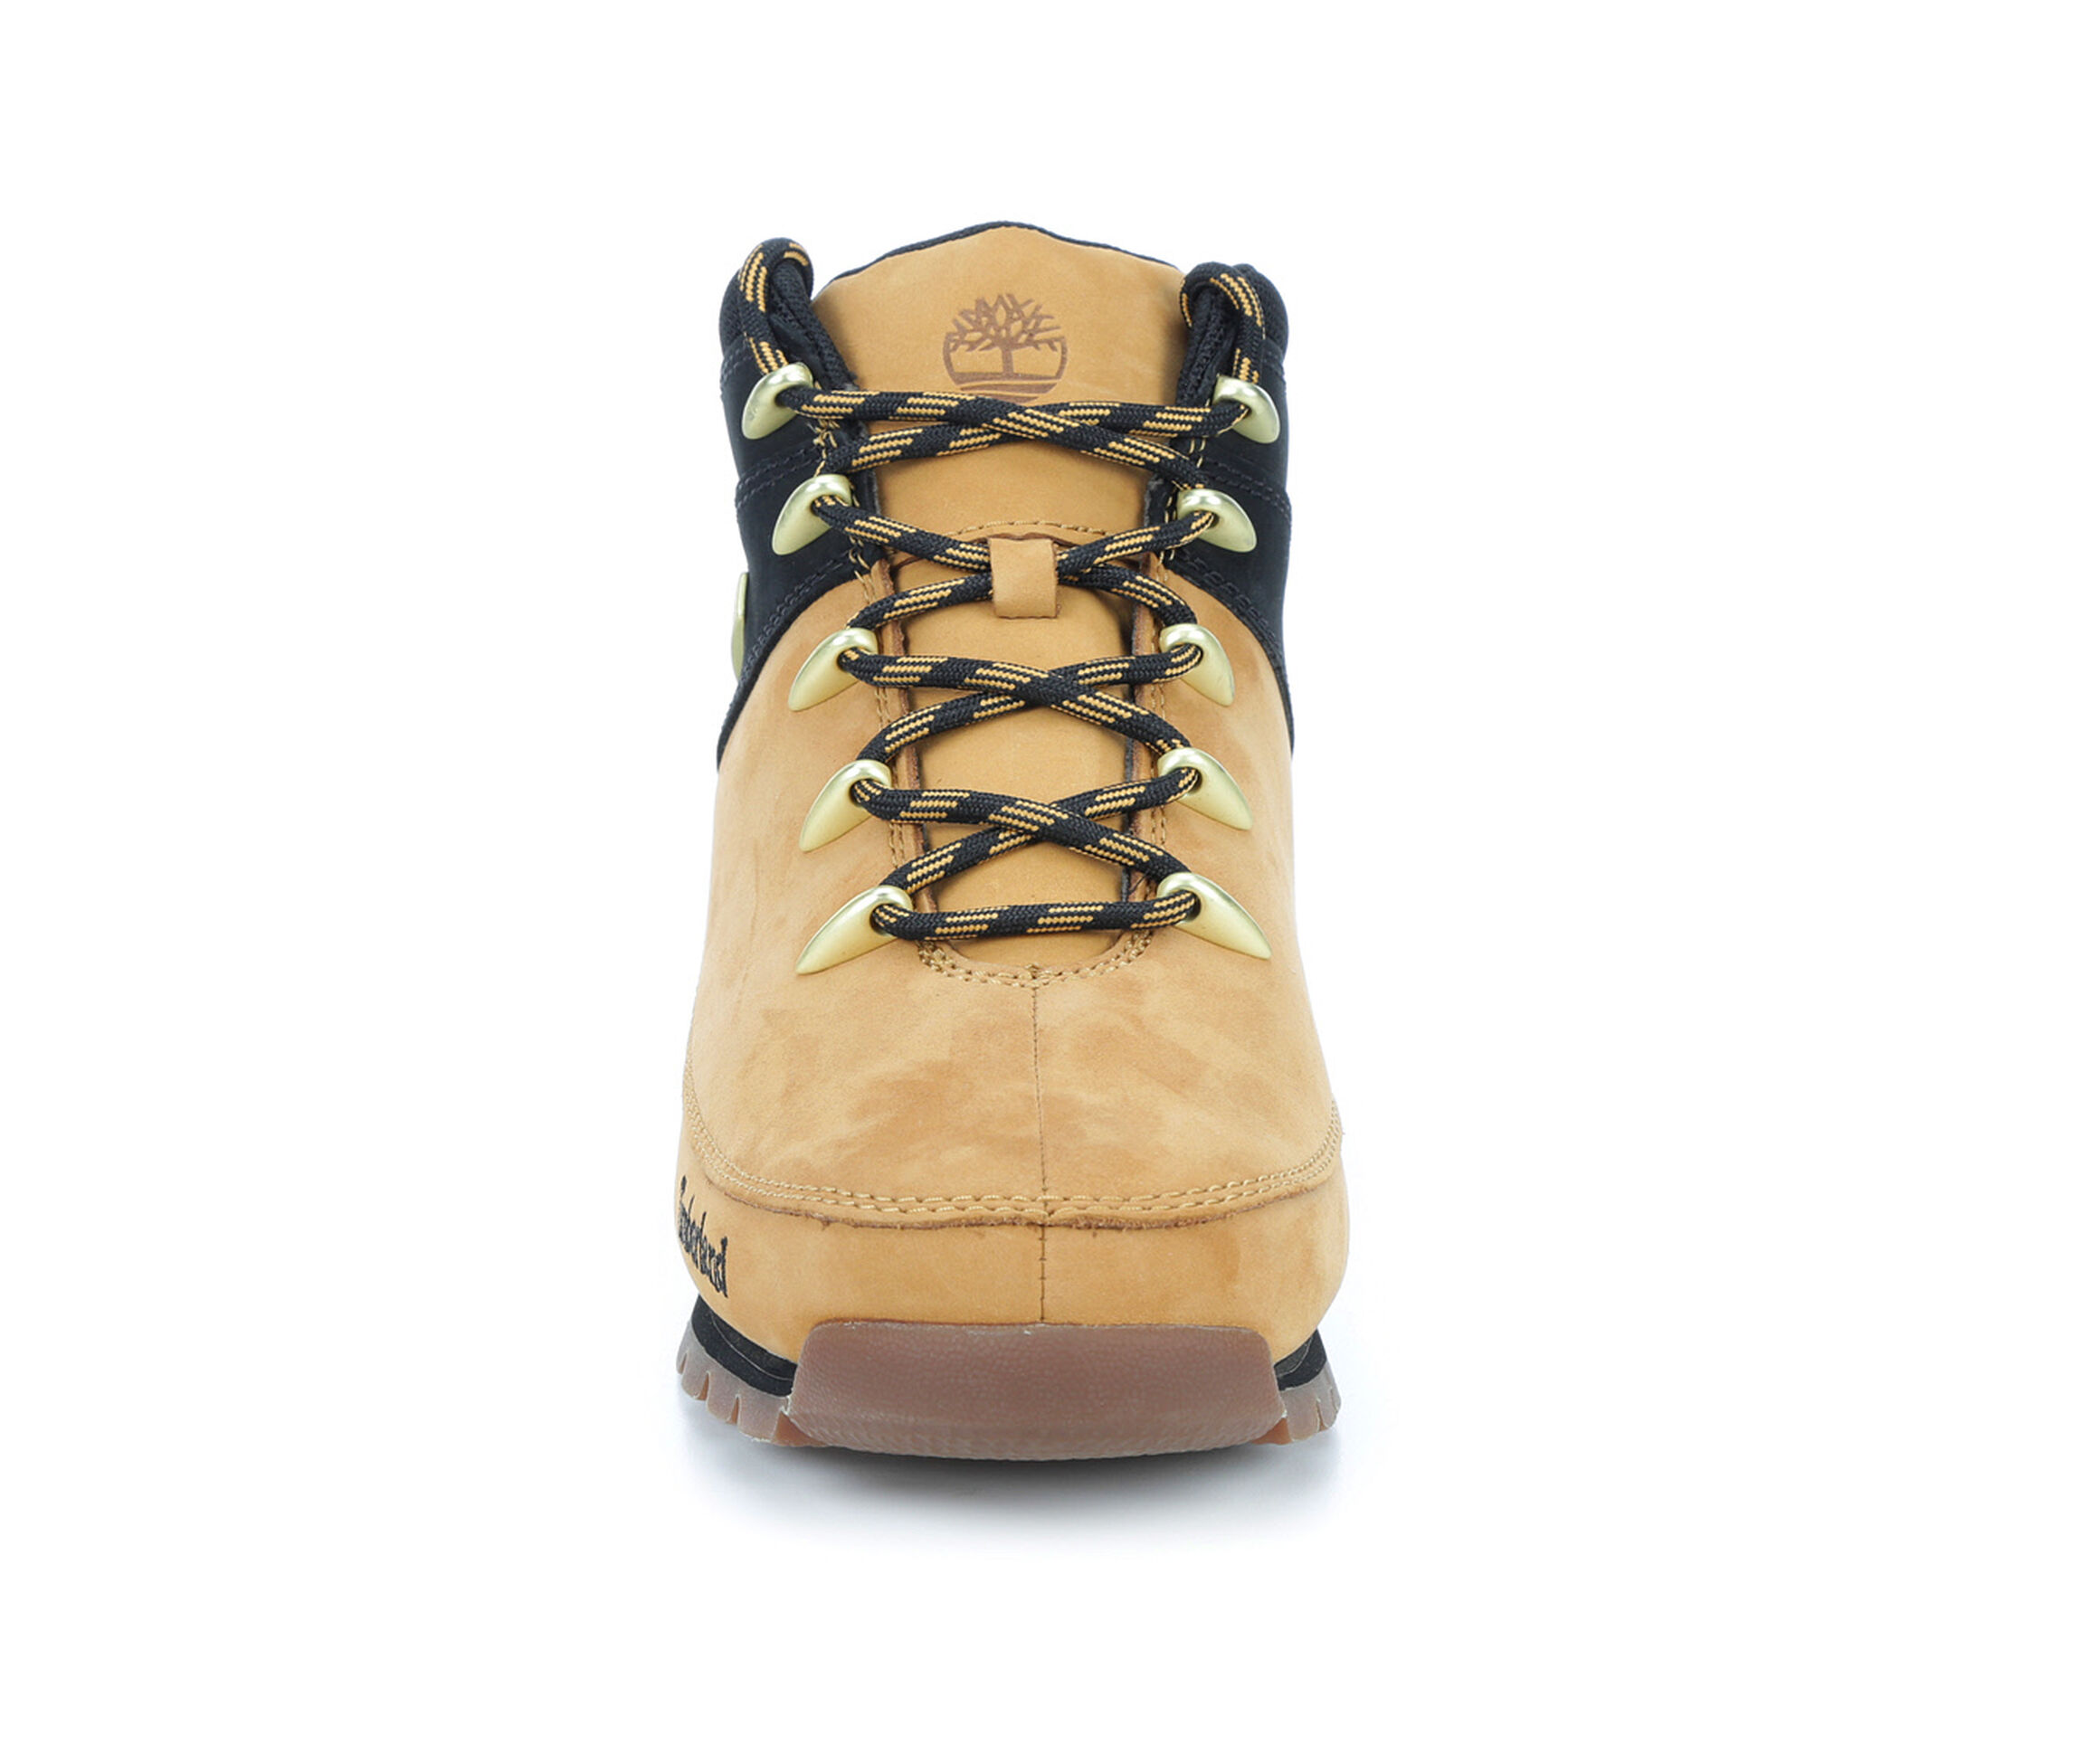 Timberland Boots For Men | Shoe Carnival